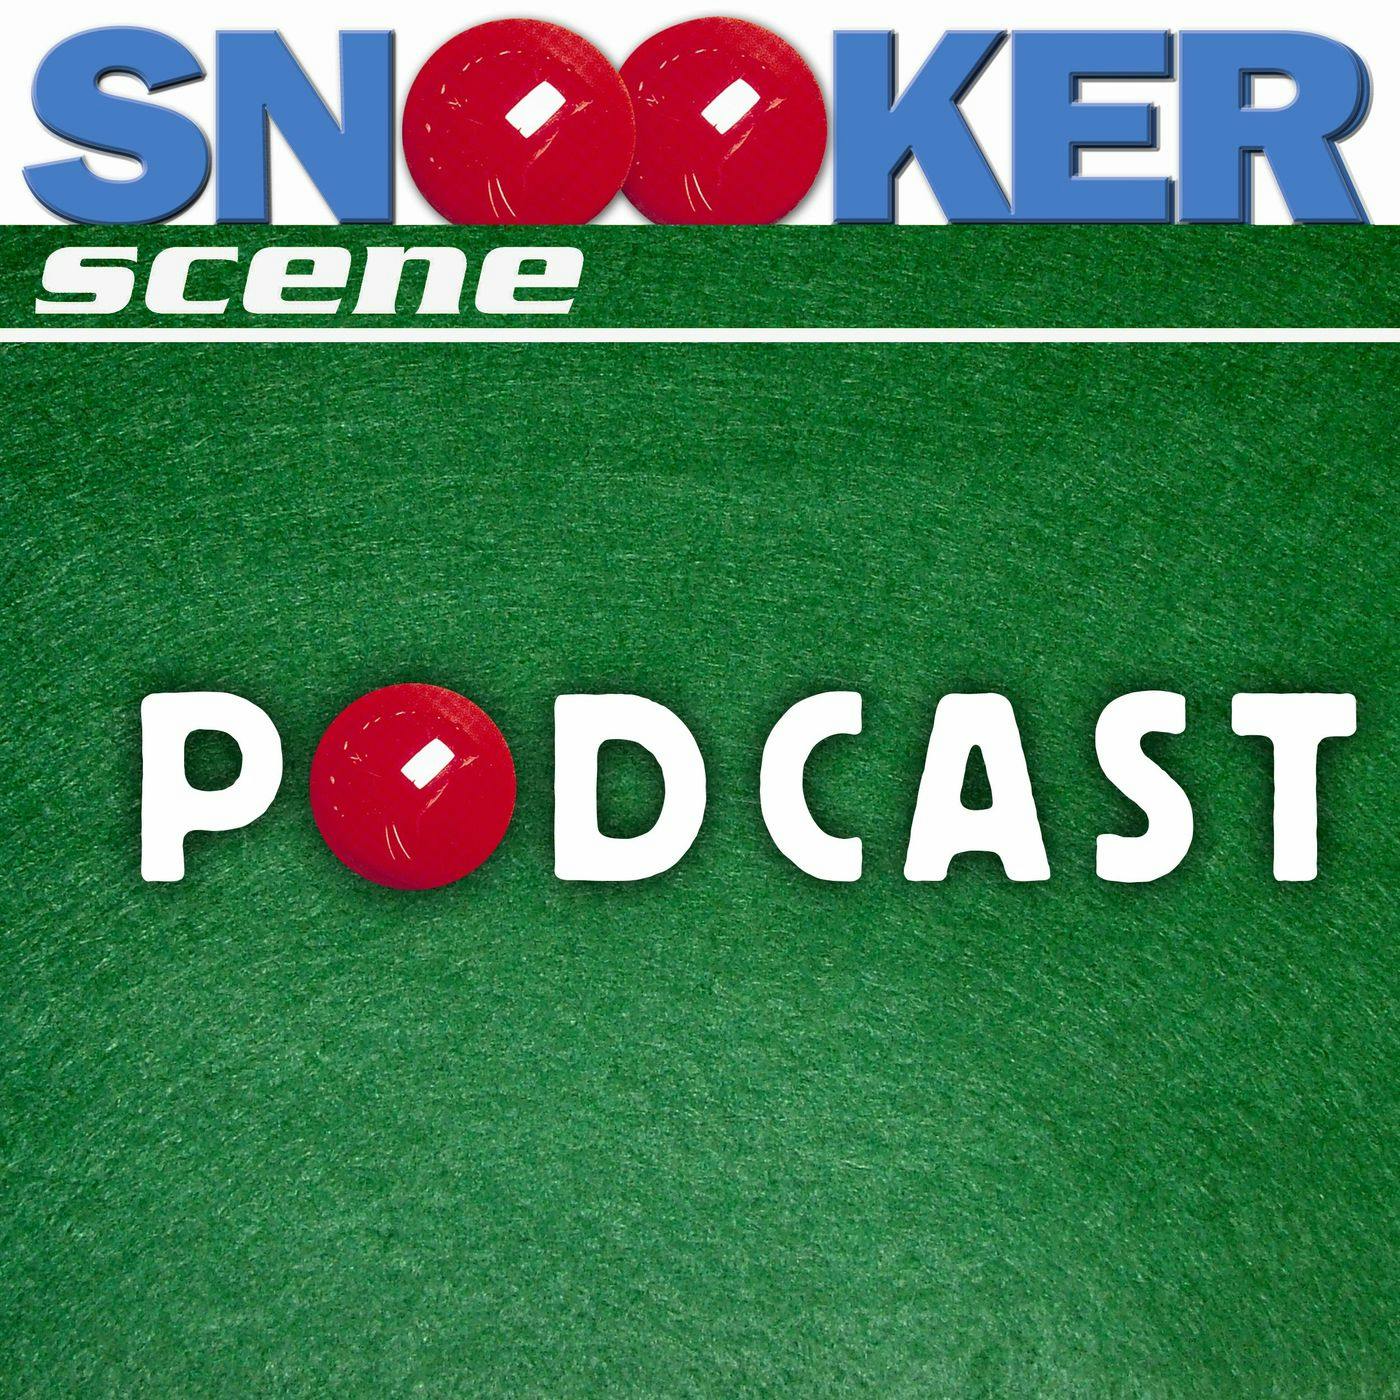 Snooker Scene Podcast episode 122 - Top Ten Tournaments of All Time (Part 2)